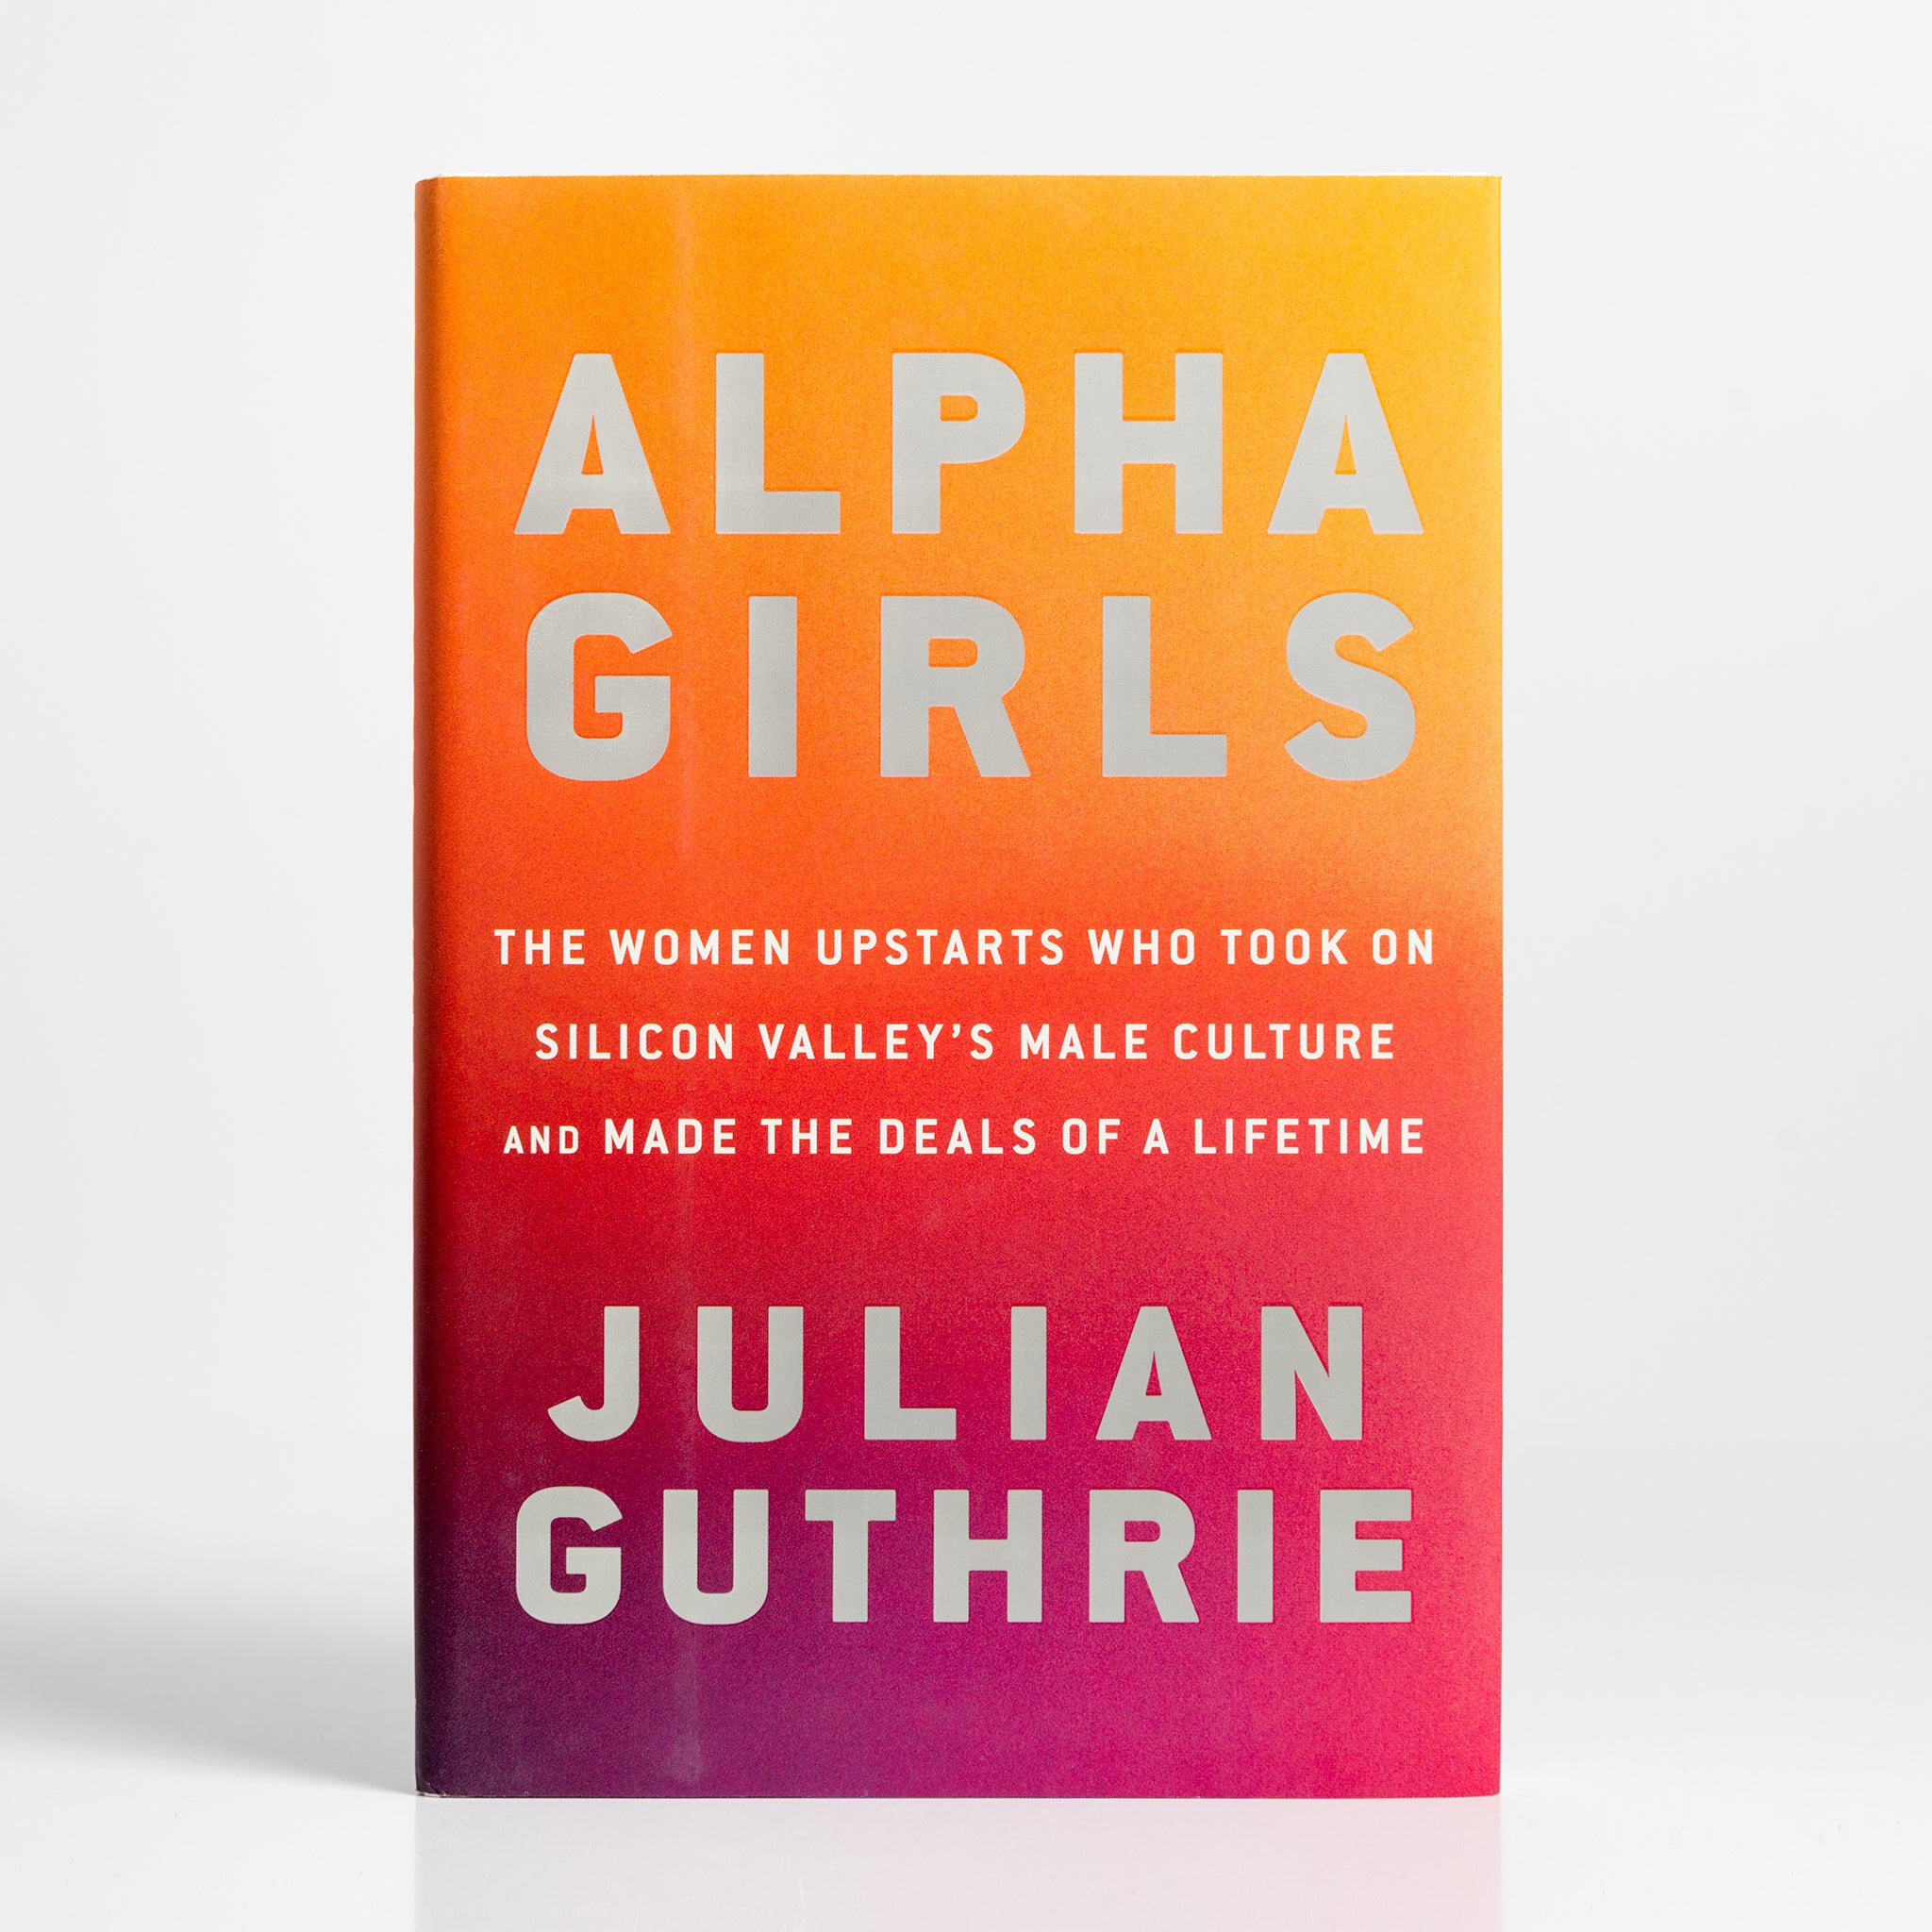 Alpha Girls: The Women Upstarts Who Took On Silicon Valley's Male Culture and Made the Deals of a Lifetime [Book]